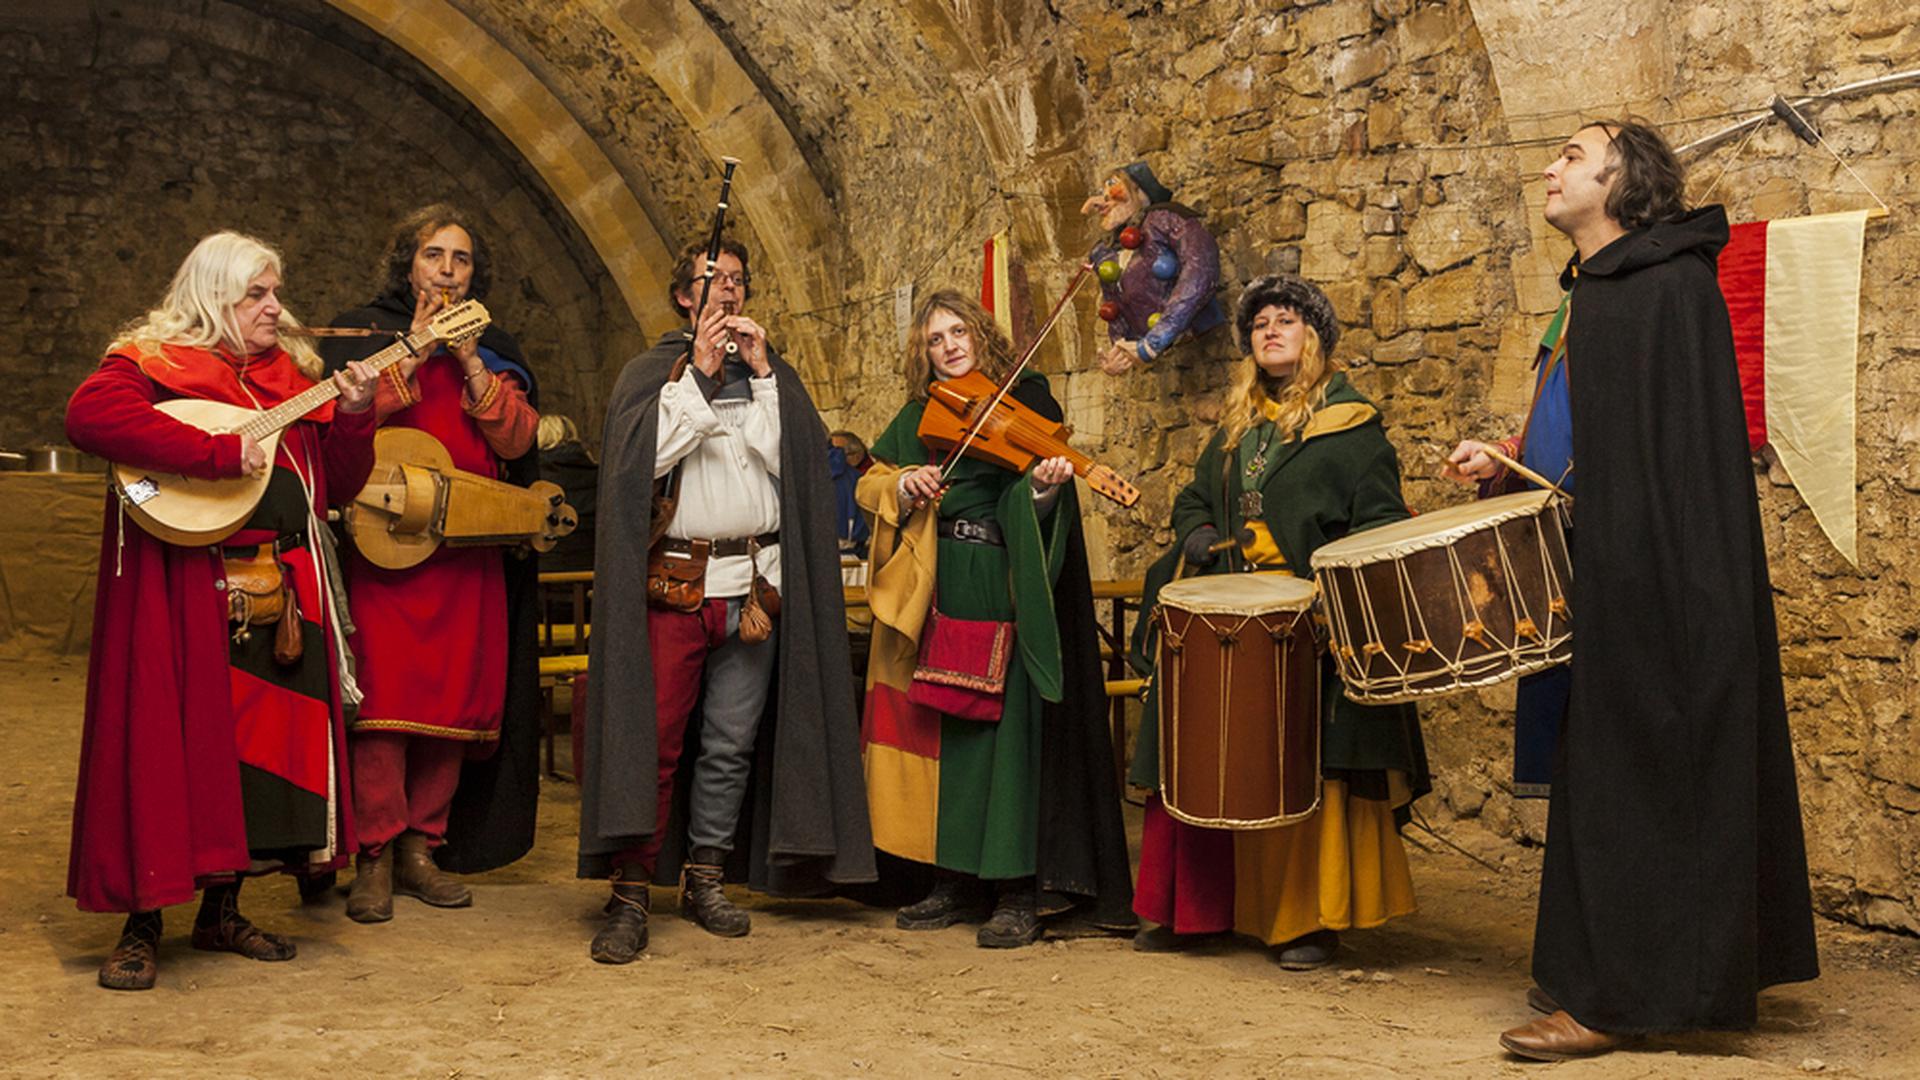 Medieval band playing in a cave in Rodemack 